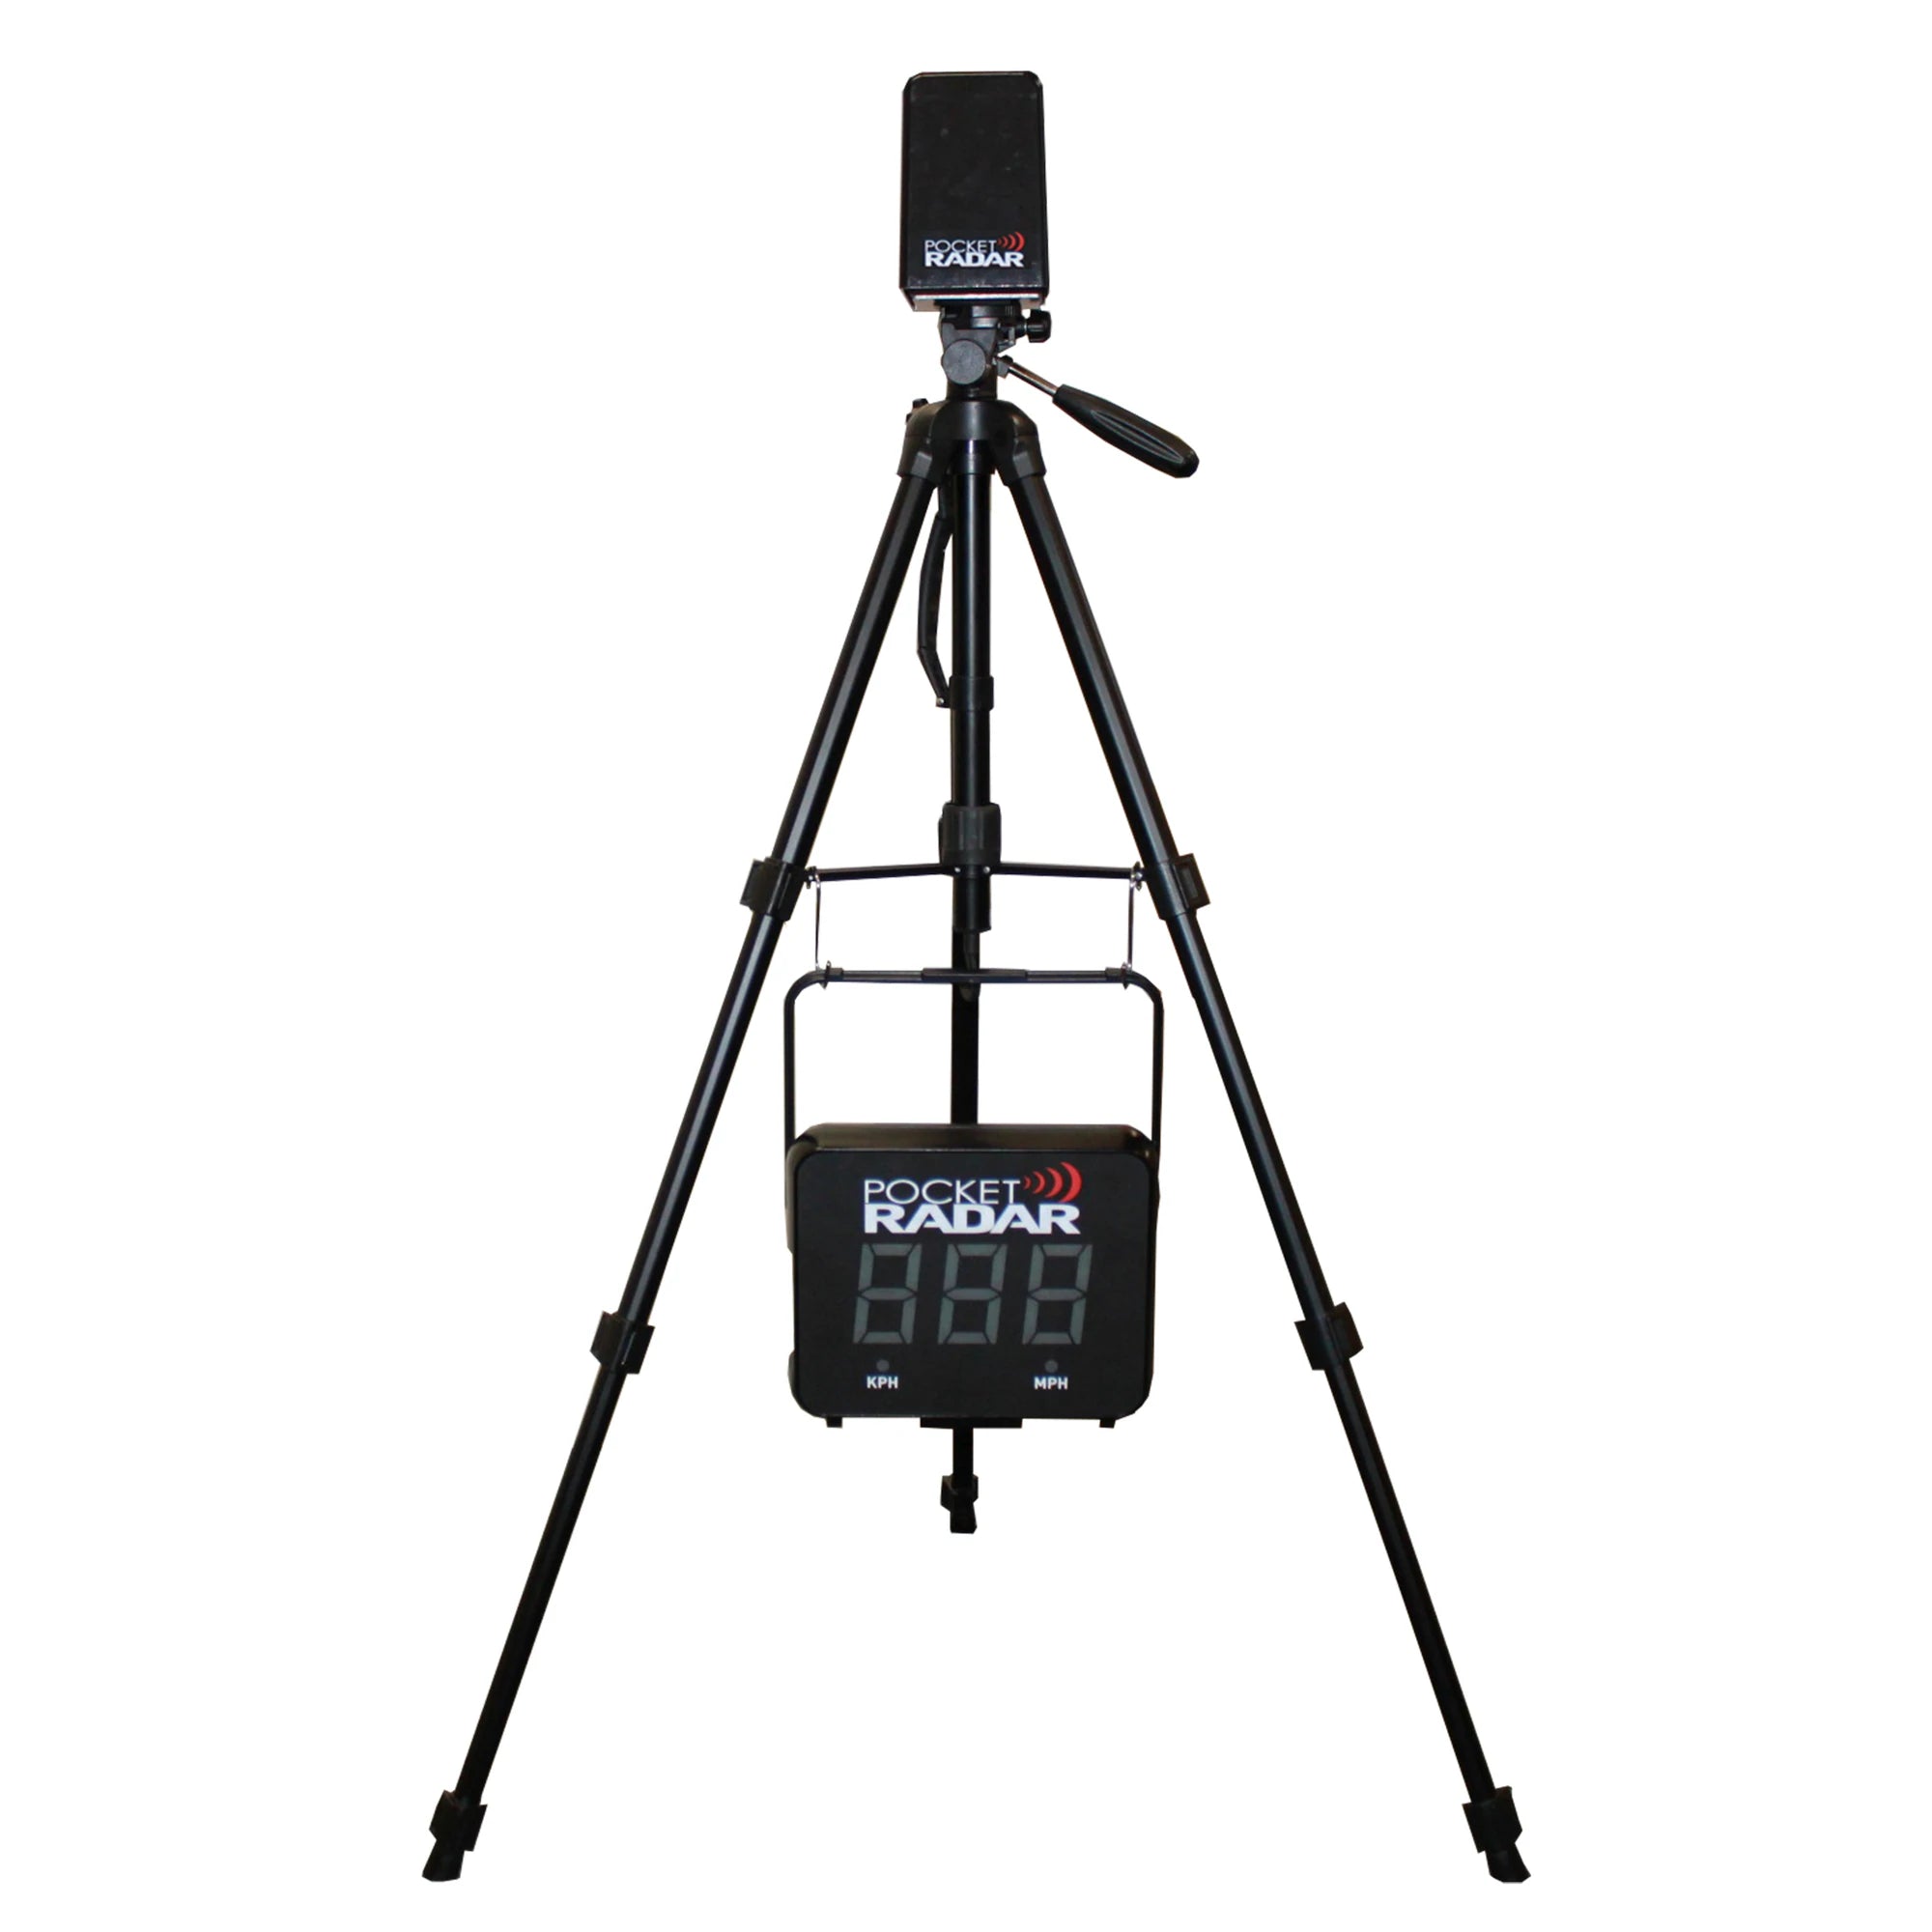 Smart Display for Smart Coach Pocket Radar Attached to Tripod